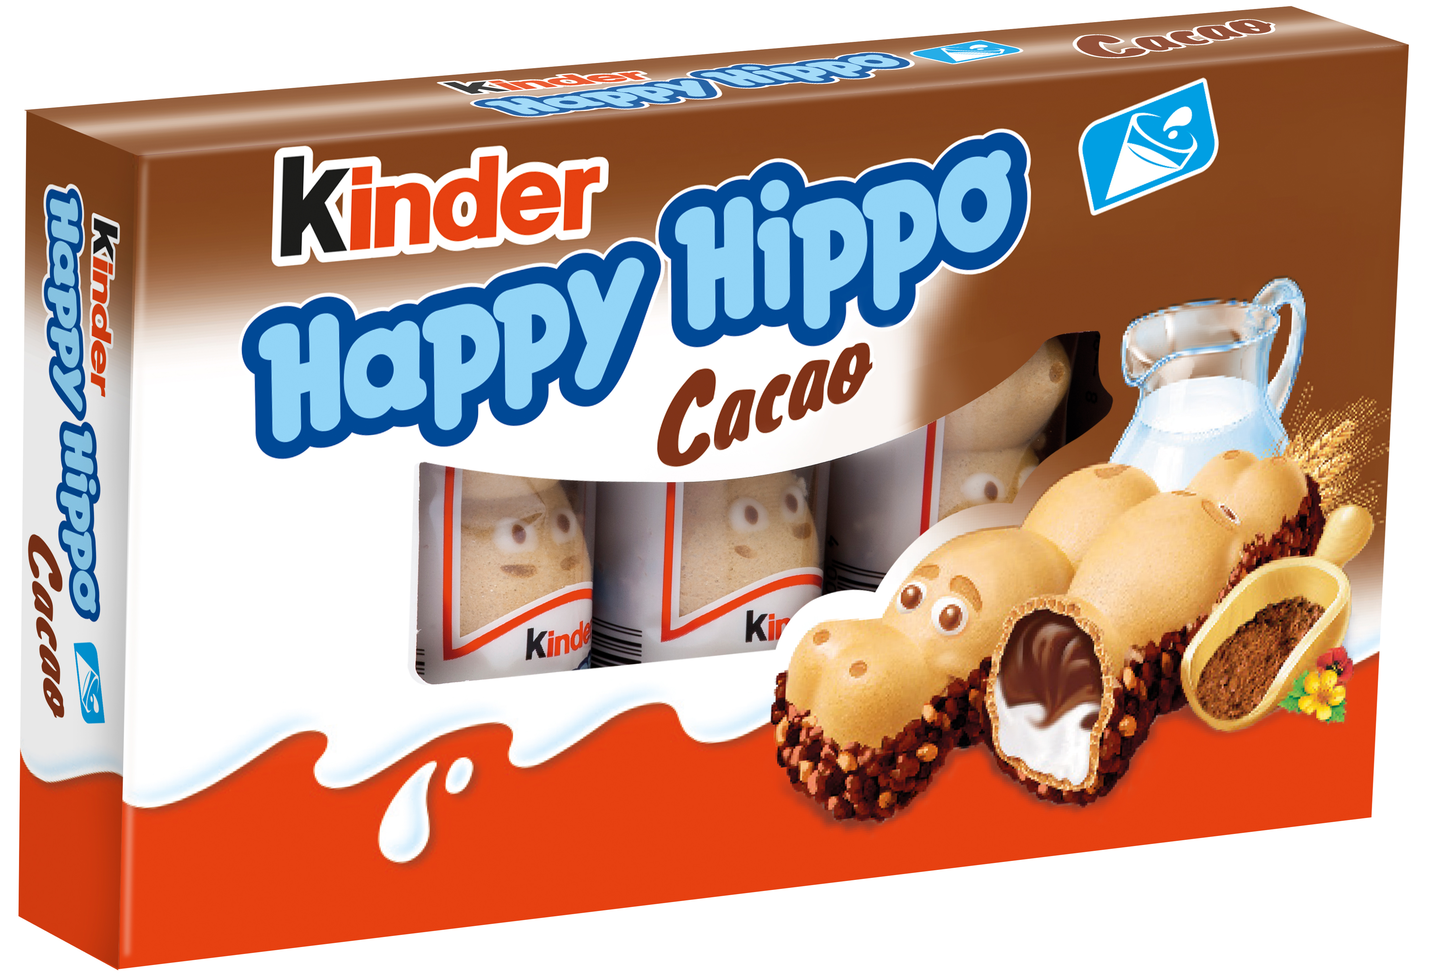 Kinder Happy Hippo 5-pack 103g